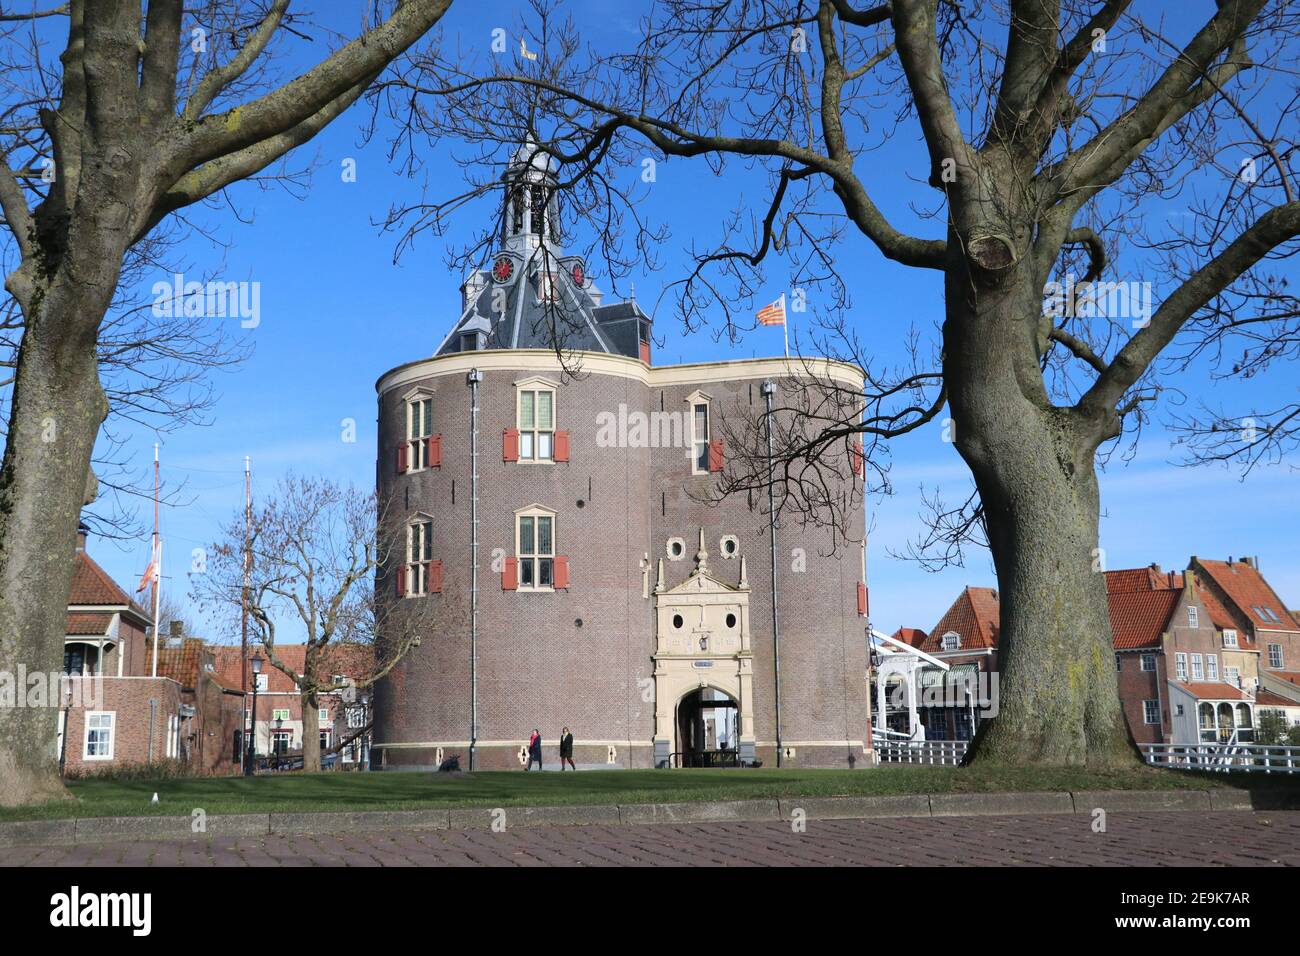 Drommedaris tower at the harbour in historic city centre in winter Enkhuizen, Noord-Holland, Netherlands, January 2021 Stock Photo